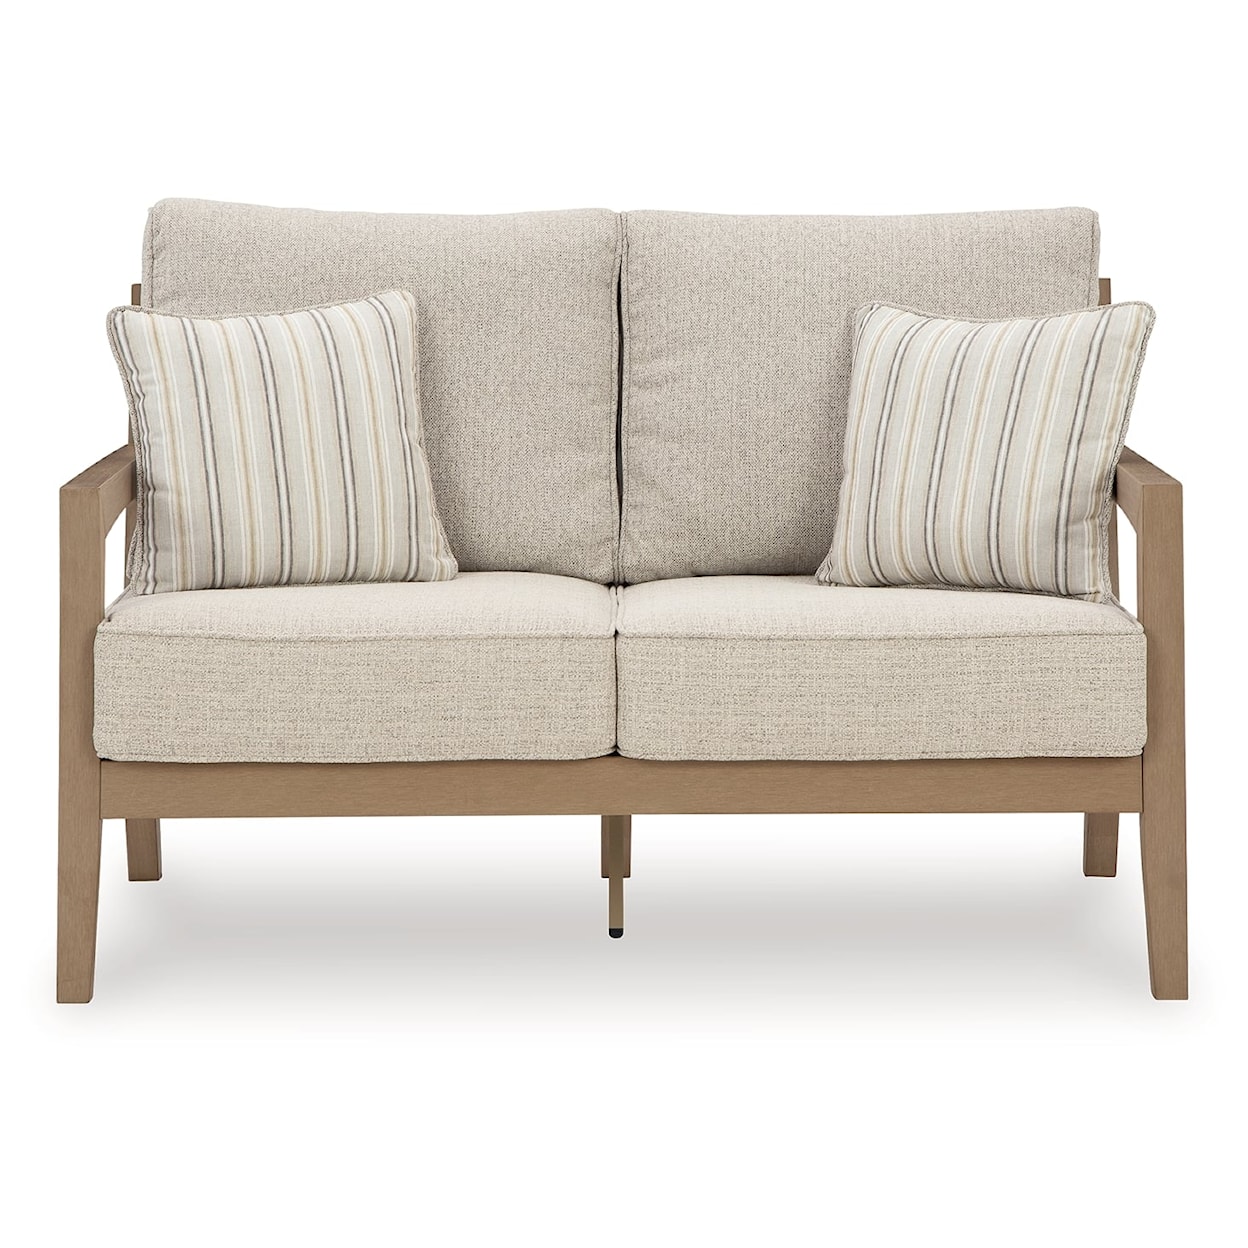 Signature Design Hallow Creek Outdoor Loveseat with Cushion